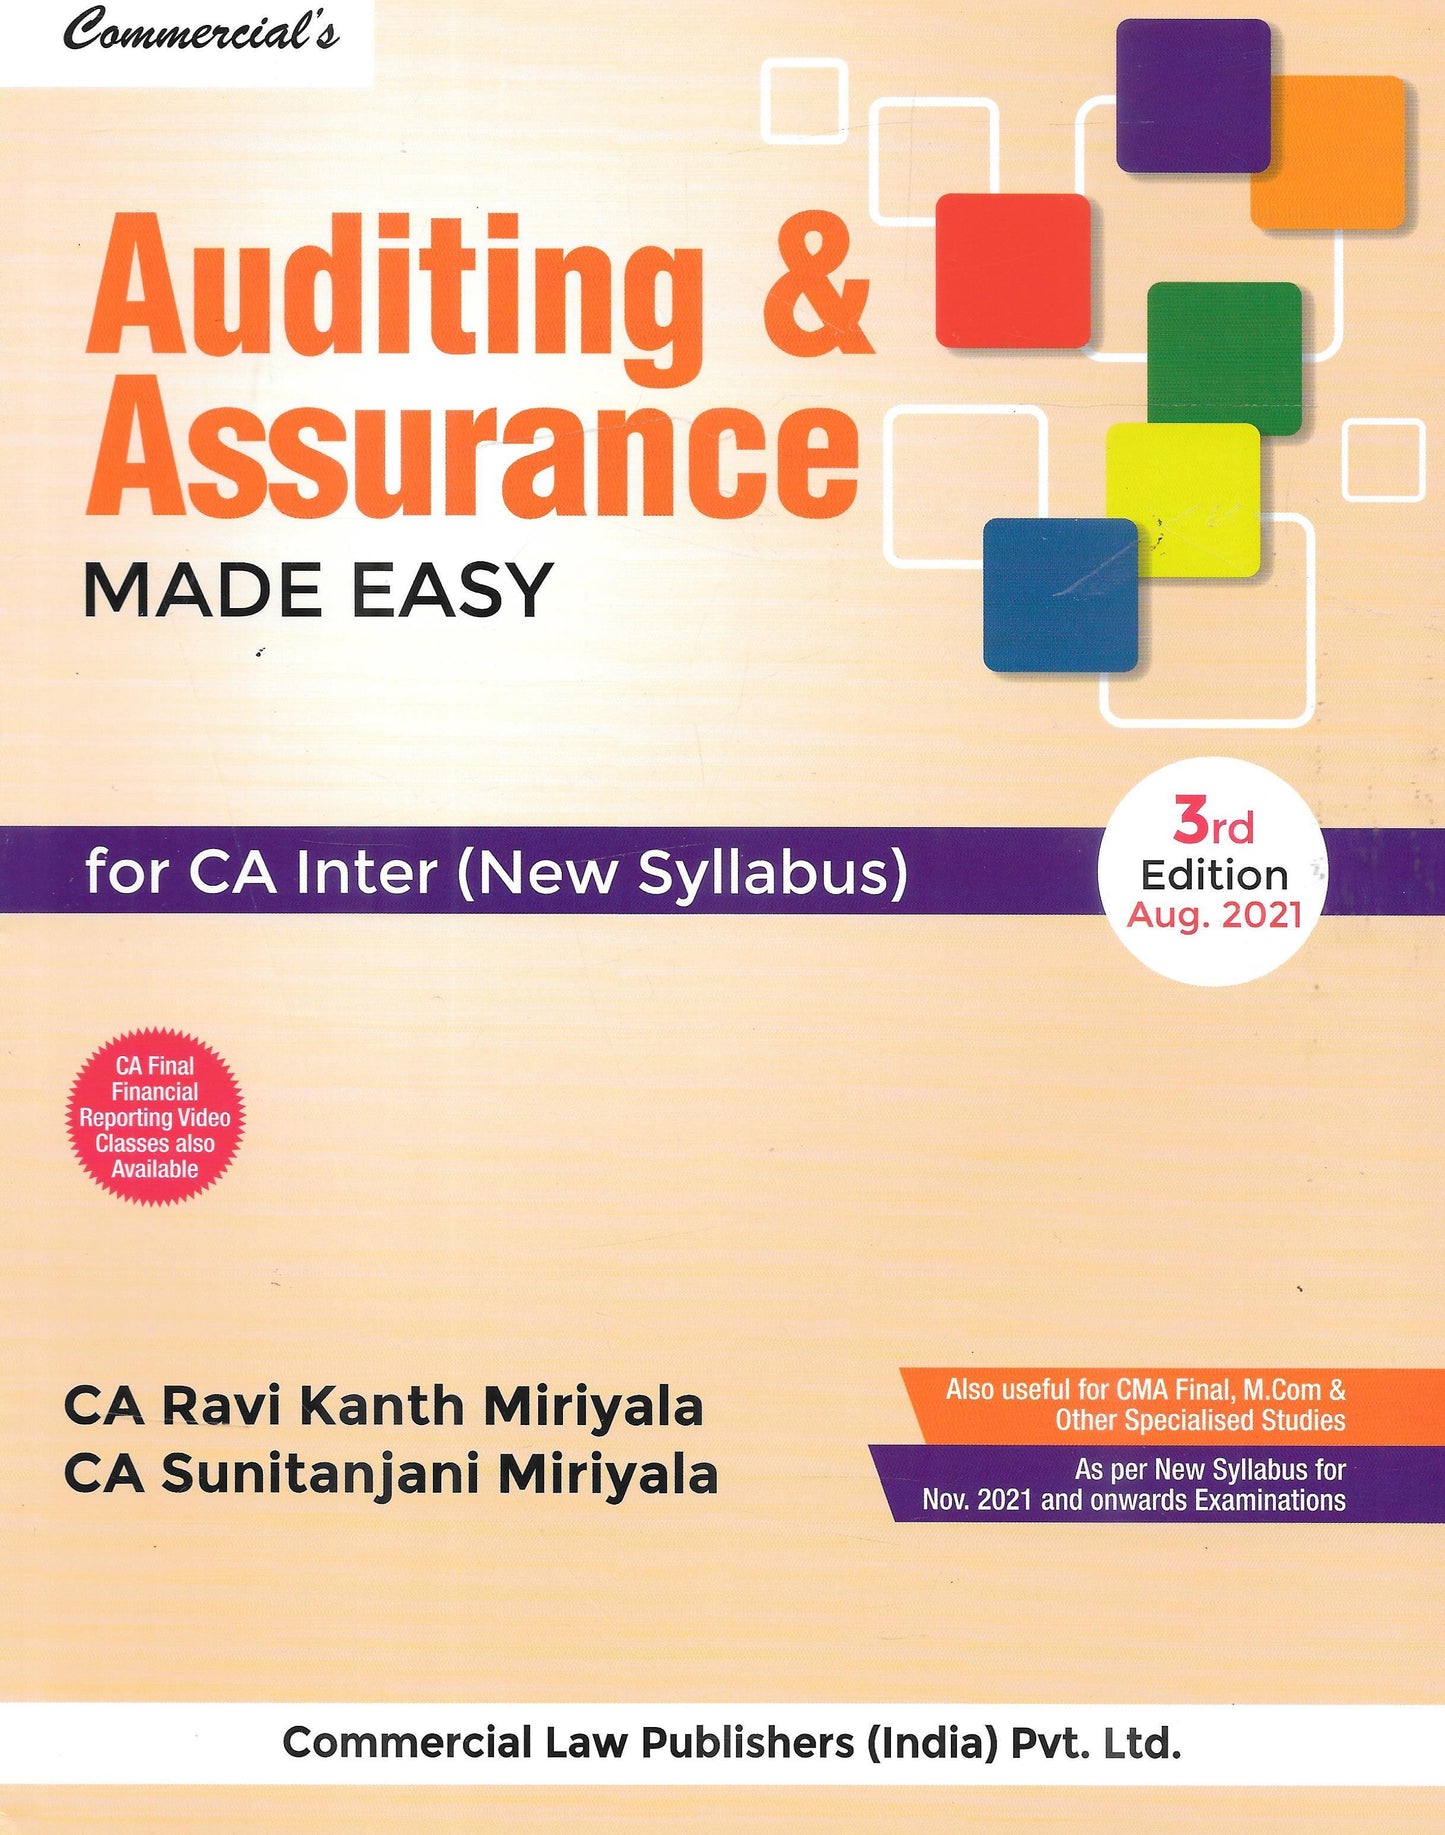 Auditing & Assurance Made Easy for CA Inter